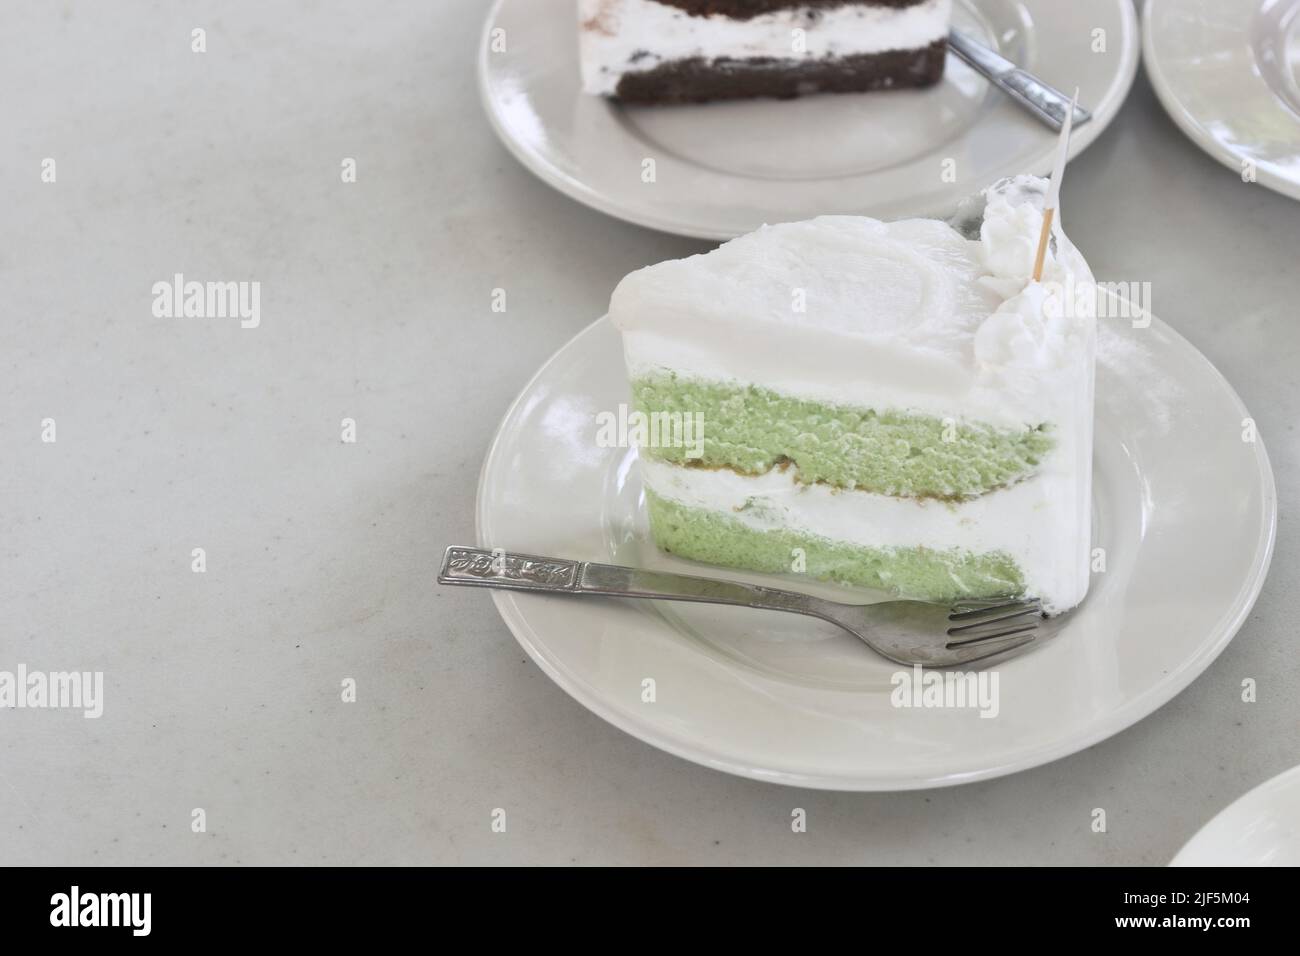 Japanese Matcha green tea with coconut milk cake in dish with spoon on white table Stock Photo